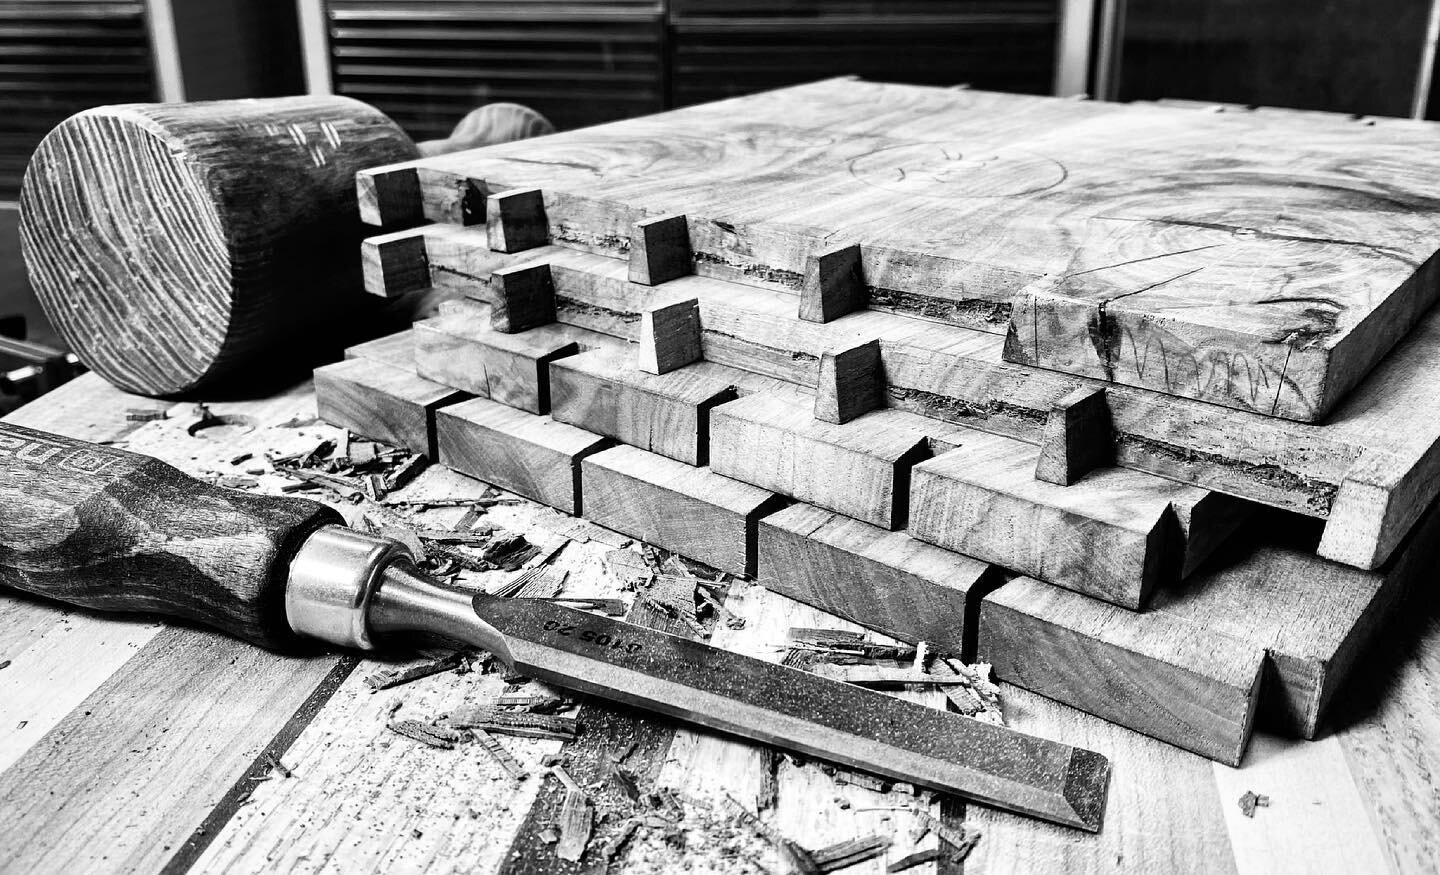 Putting in work today - dovetails for days.  Got to break in the new @floriptoolworks saw today.  It cuts like a dream compares to my pull saws - a little small for my mitts so I need to figure something out to make it more comfortable, but I really 